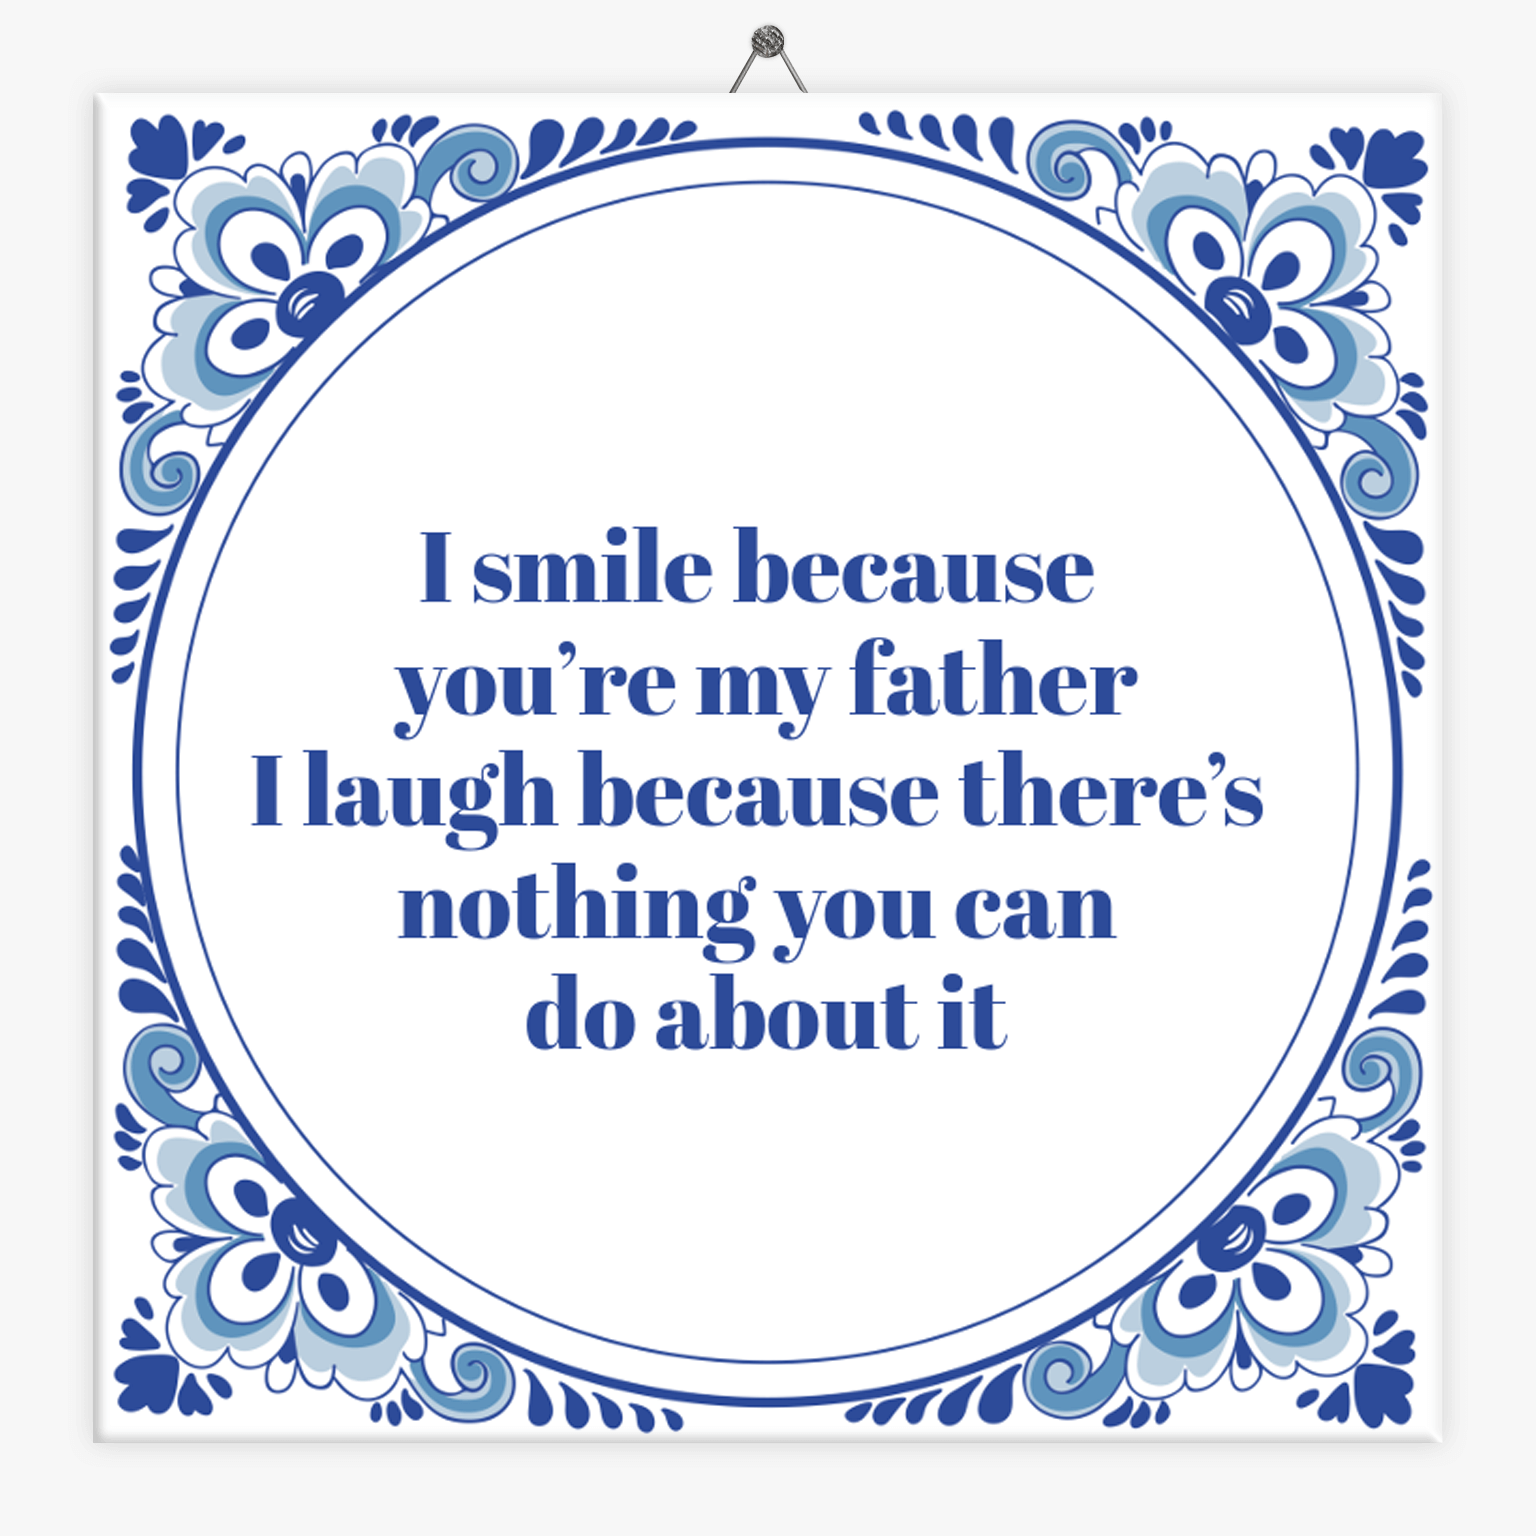 Tegeltje Vaderdag: I smile because you're my father. I laugh because there's nothing you can do about it + Plakhanger